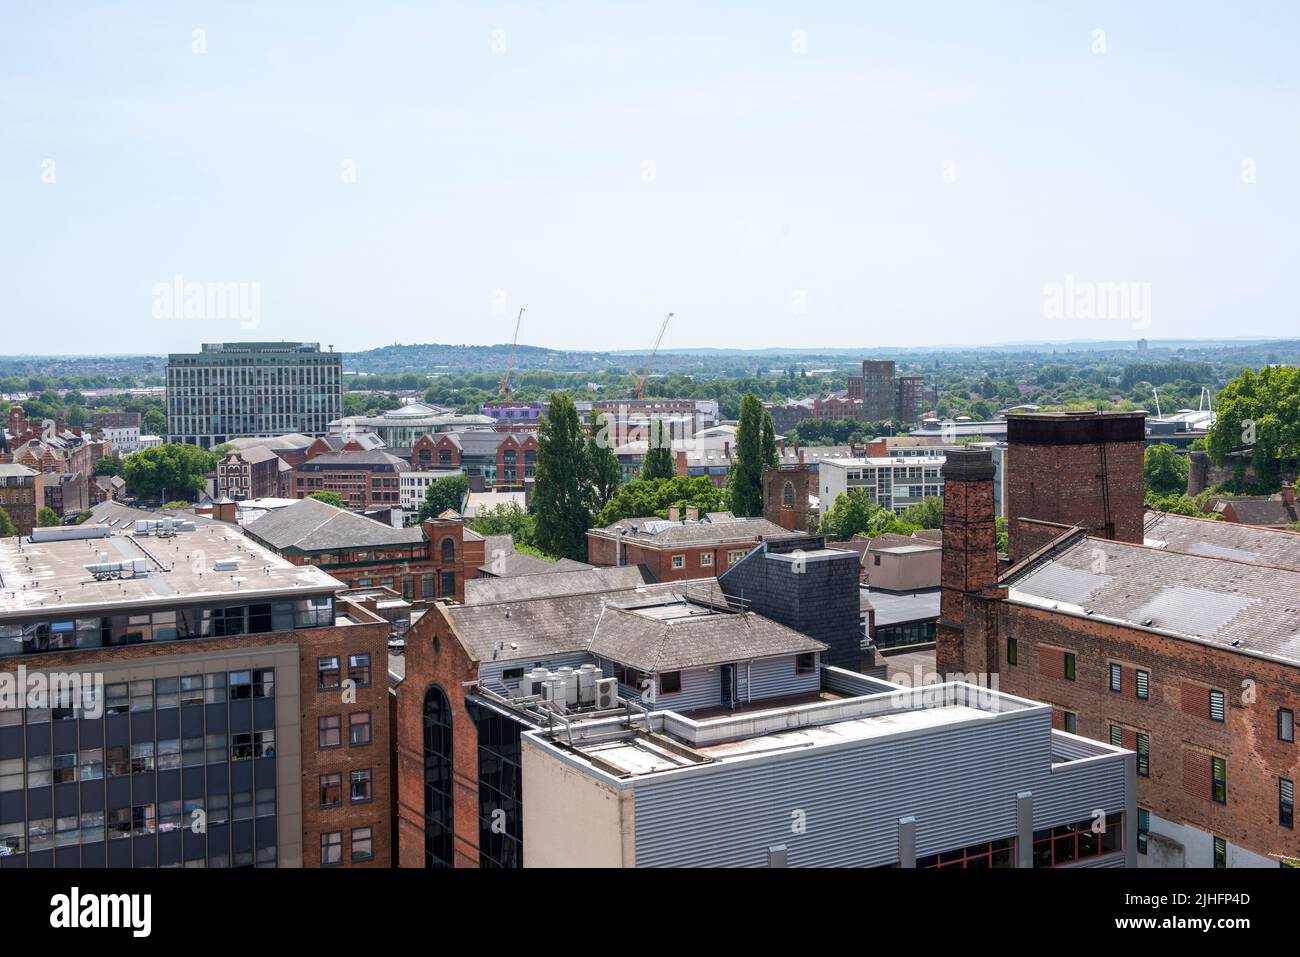 Looking out to the South of the City from the roof of the Pearl Assurance Building in Nottingham, Nottinghamshire England UK Stock Photo